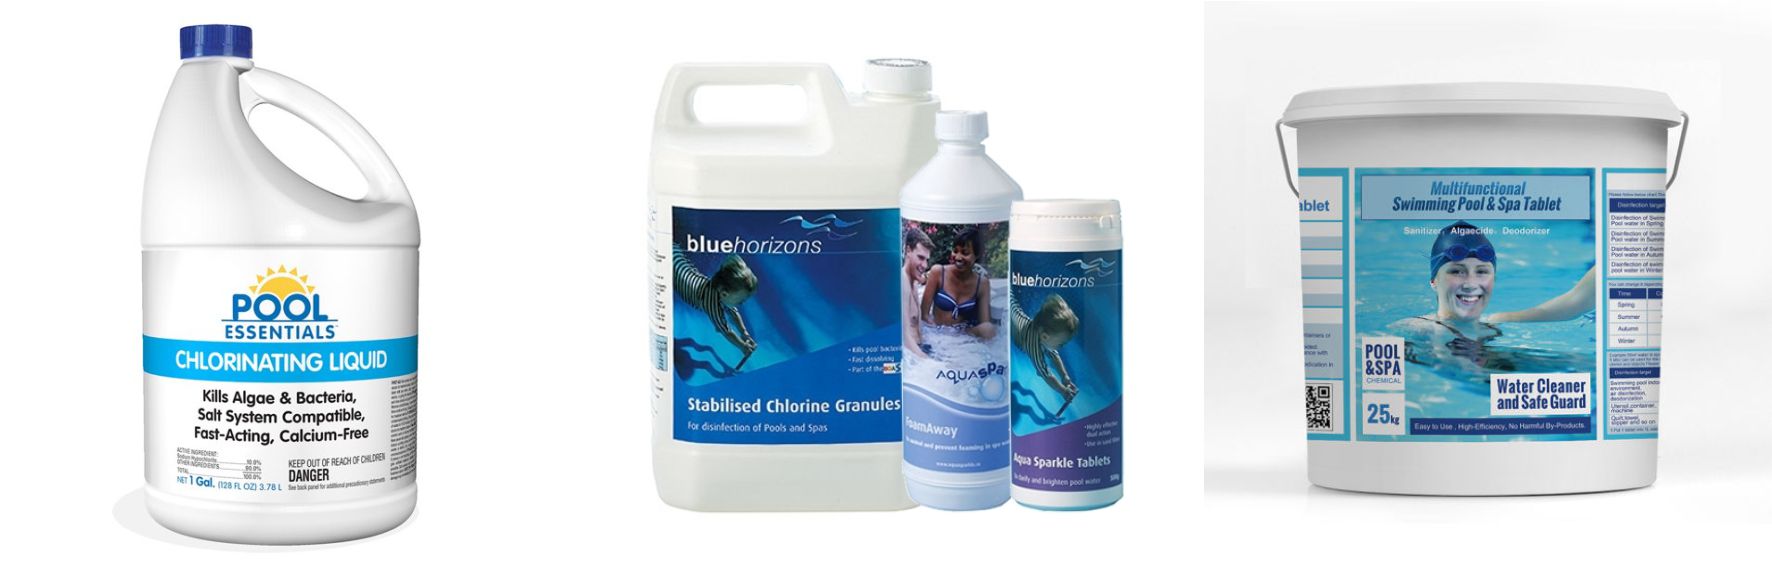 Equipment for pool - chemicals